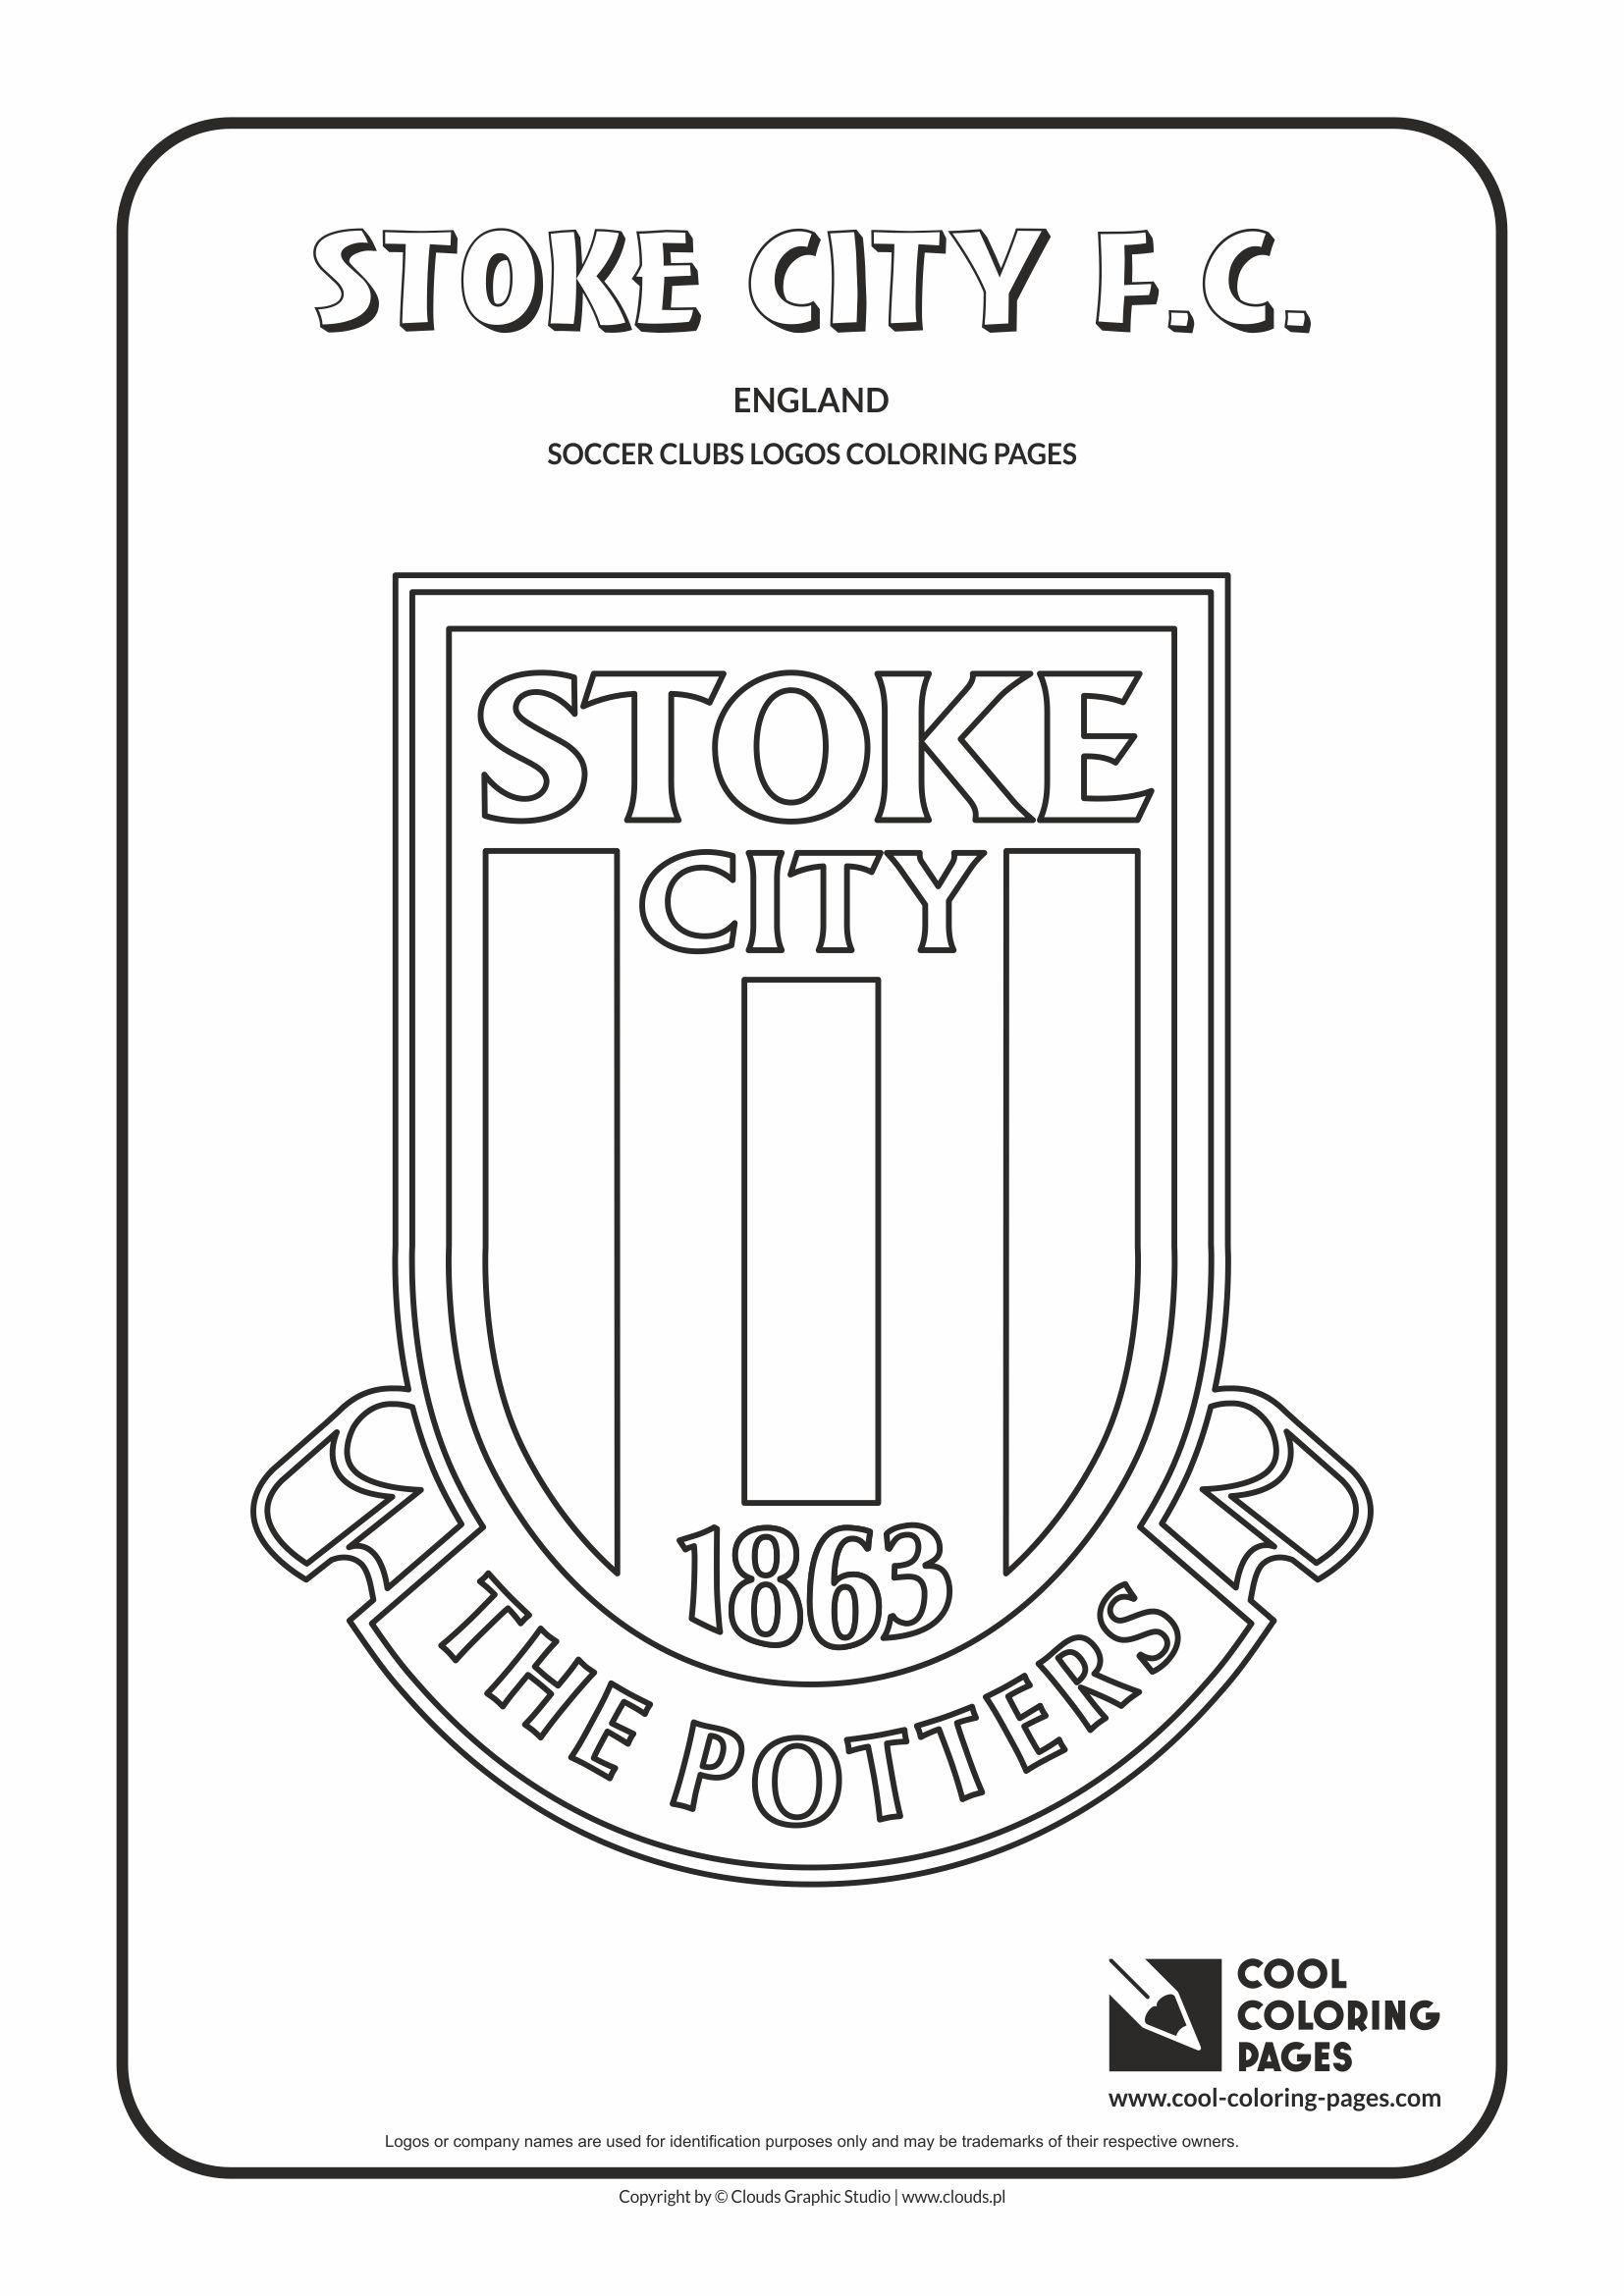 Stoke Logo - Cool Coloring Pages Stoke City F.C. logo coloring page - Cool ...